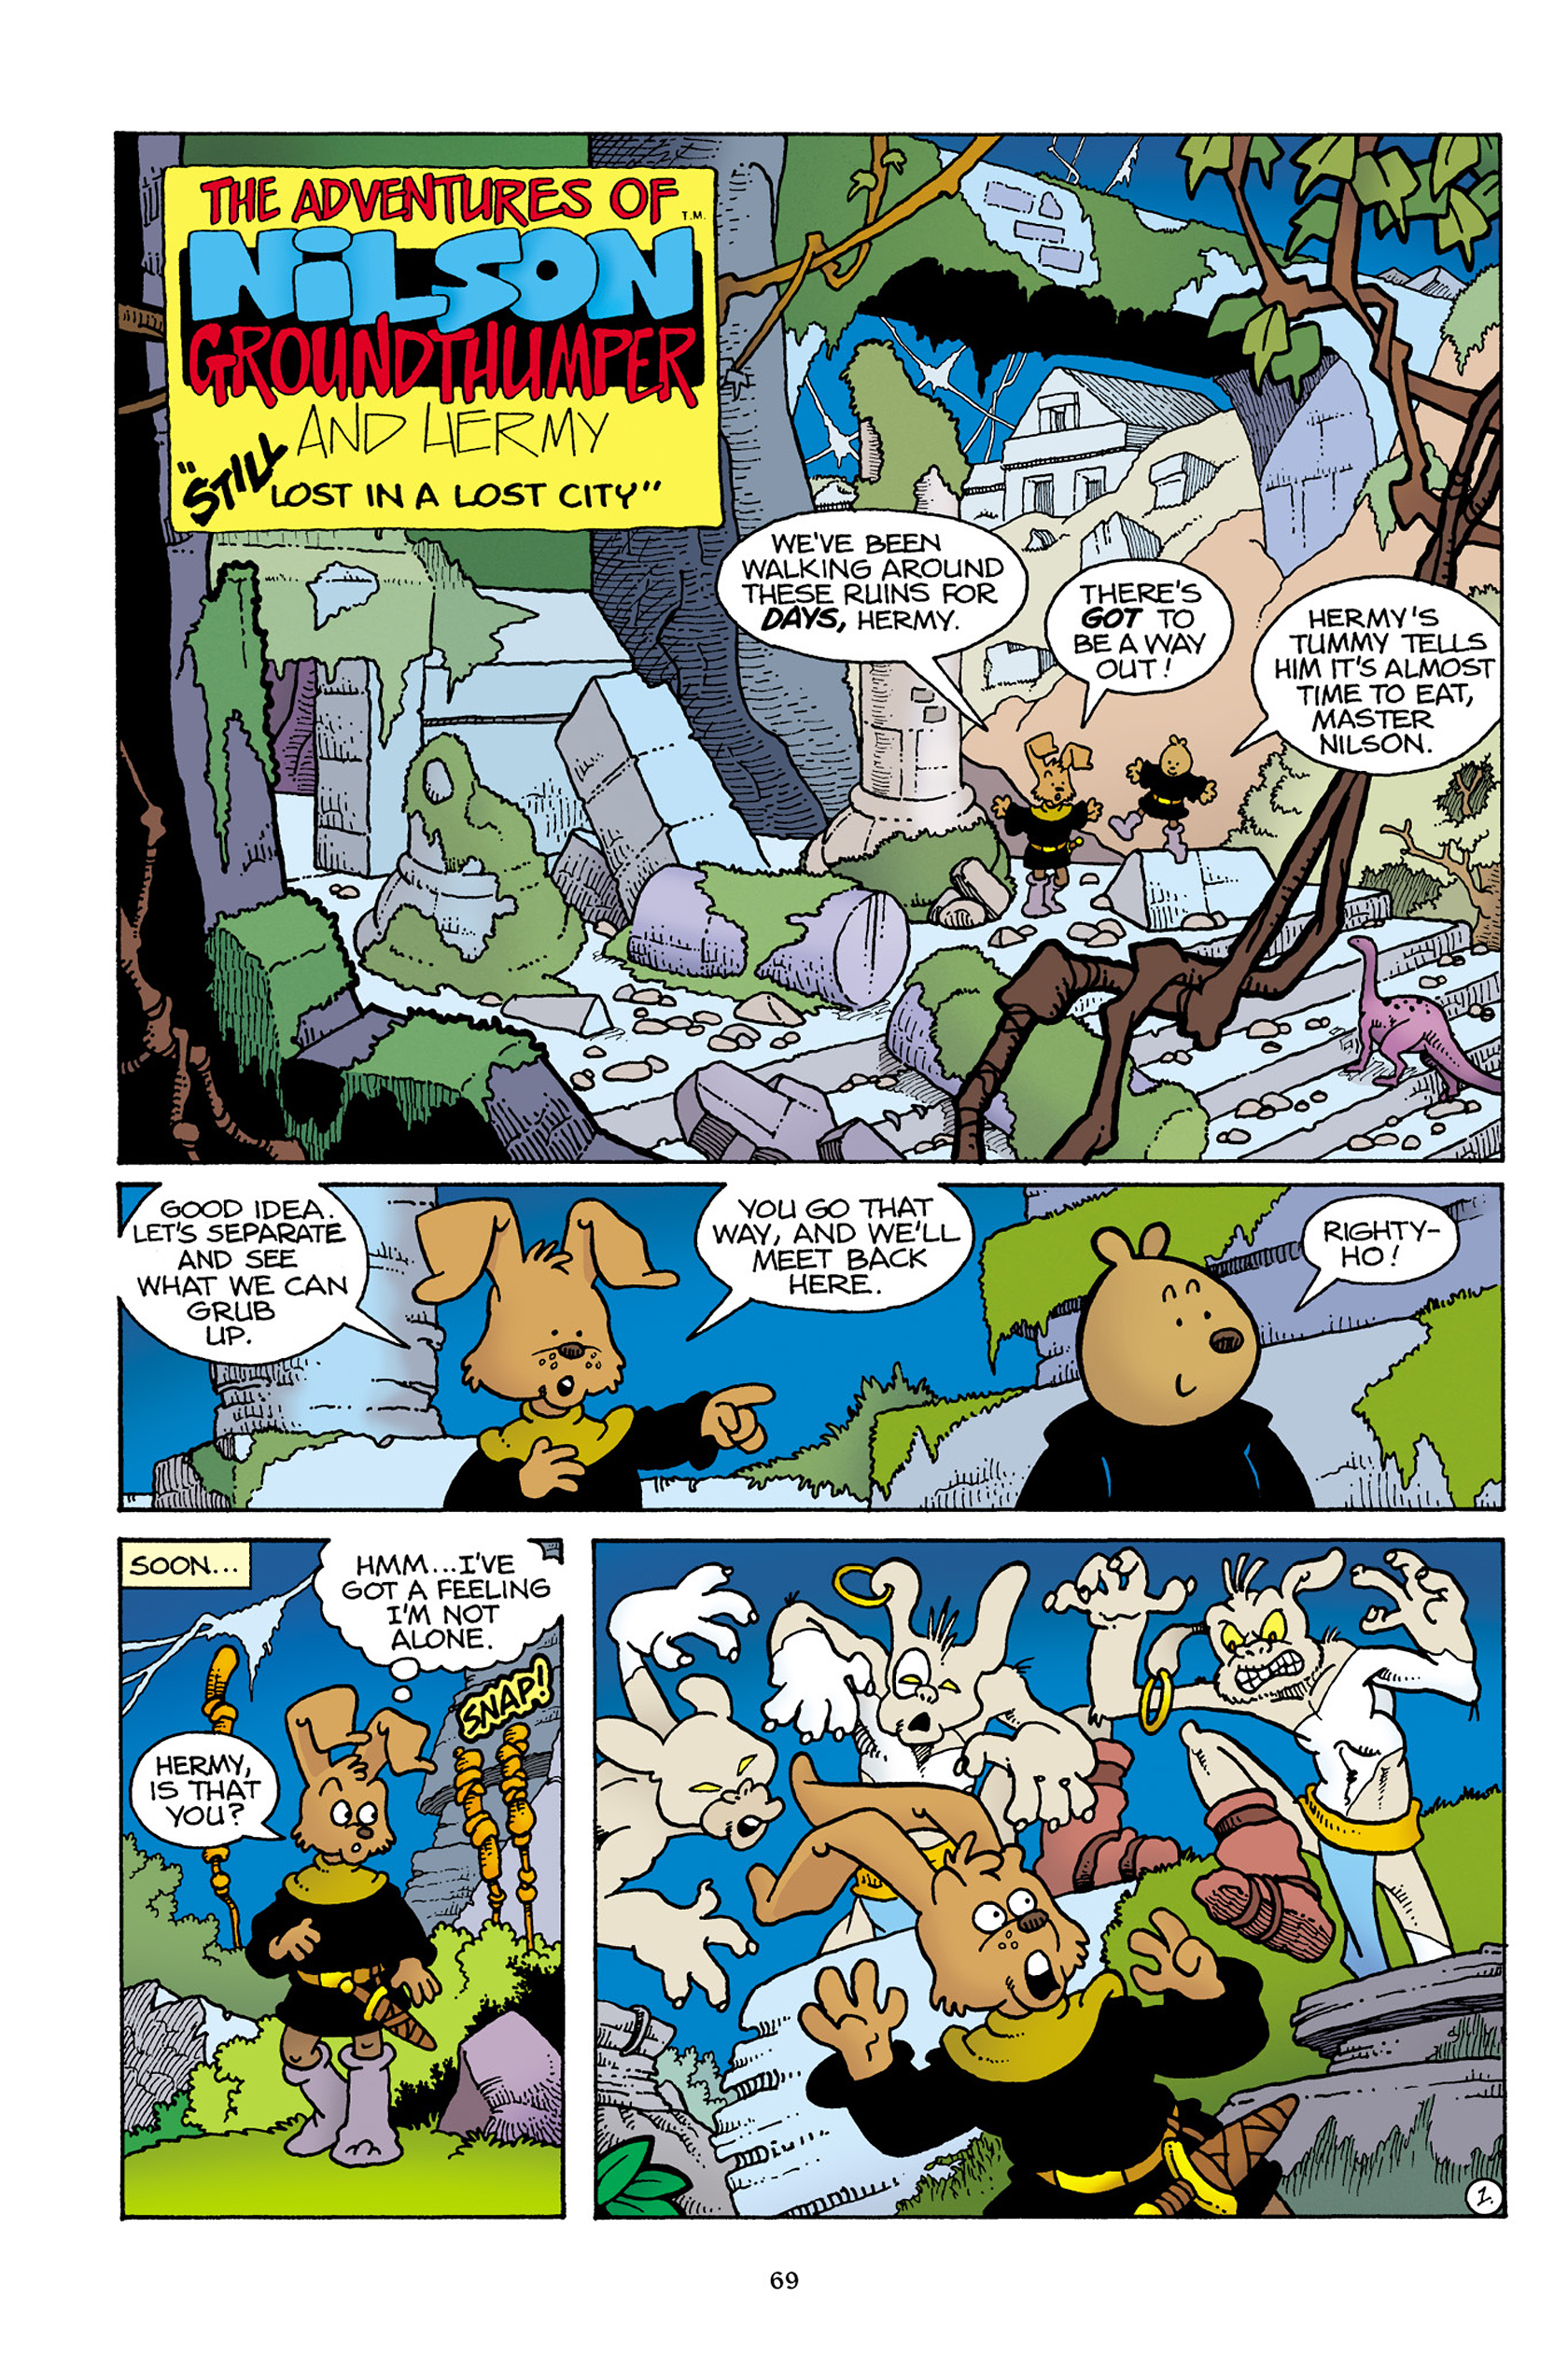 The Adventures of Nilson Groundthumper and Hermy TPB #1 - English 68